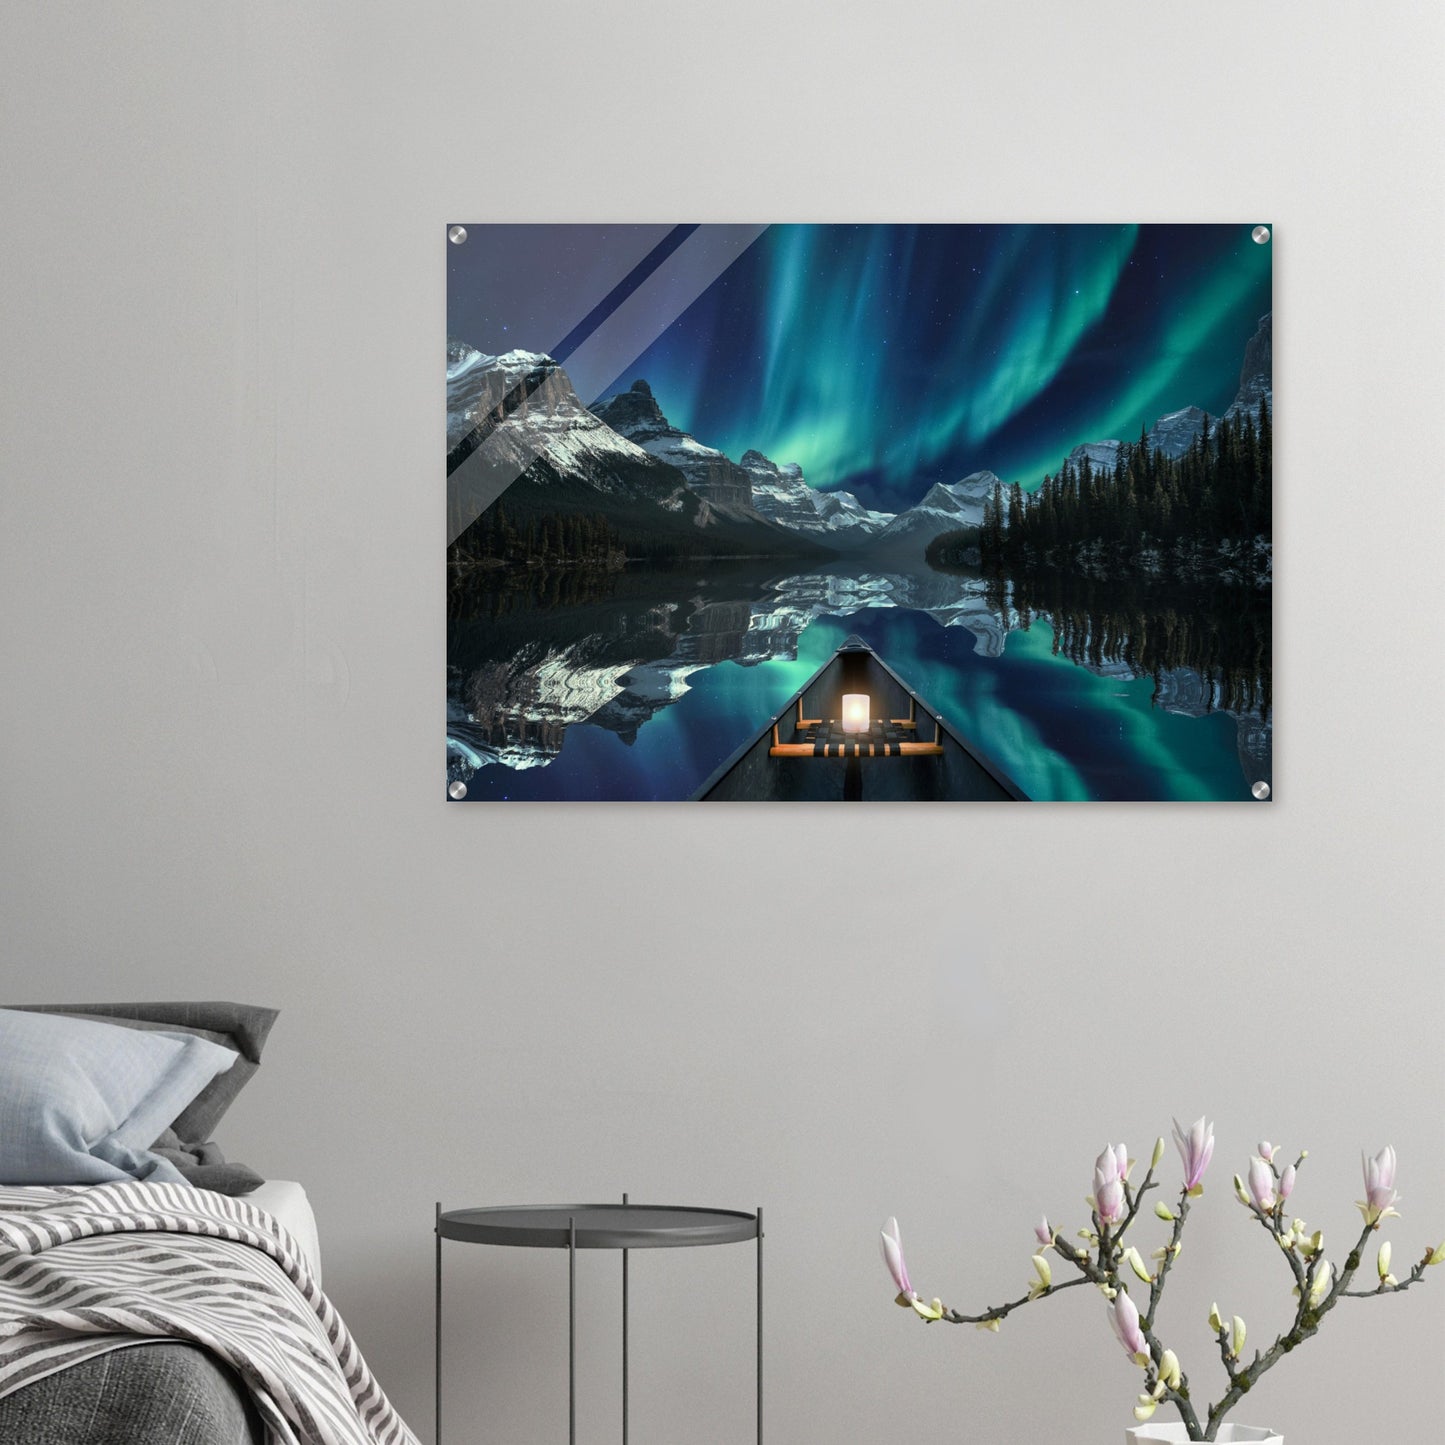 Unique Aurora Borealis Acrylic Prints - Multi Size Personalized Northern Light View - Modern Wall Art - Perfect Aurora Lovers Gift 6